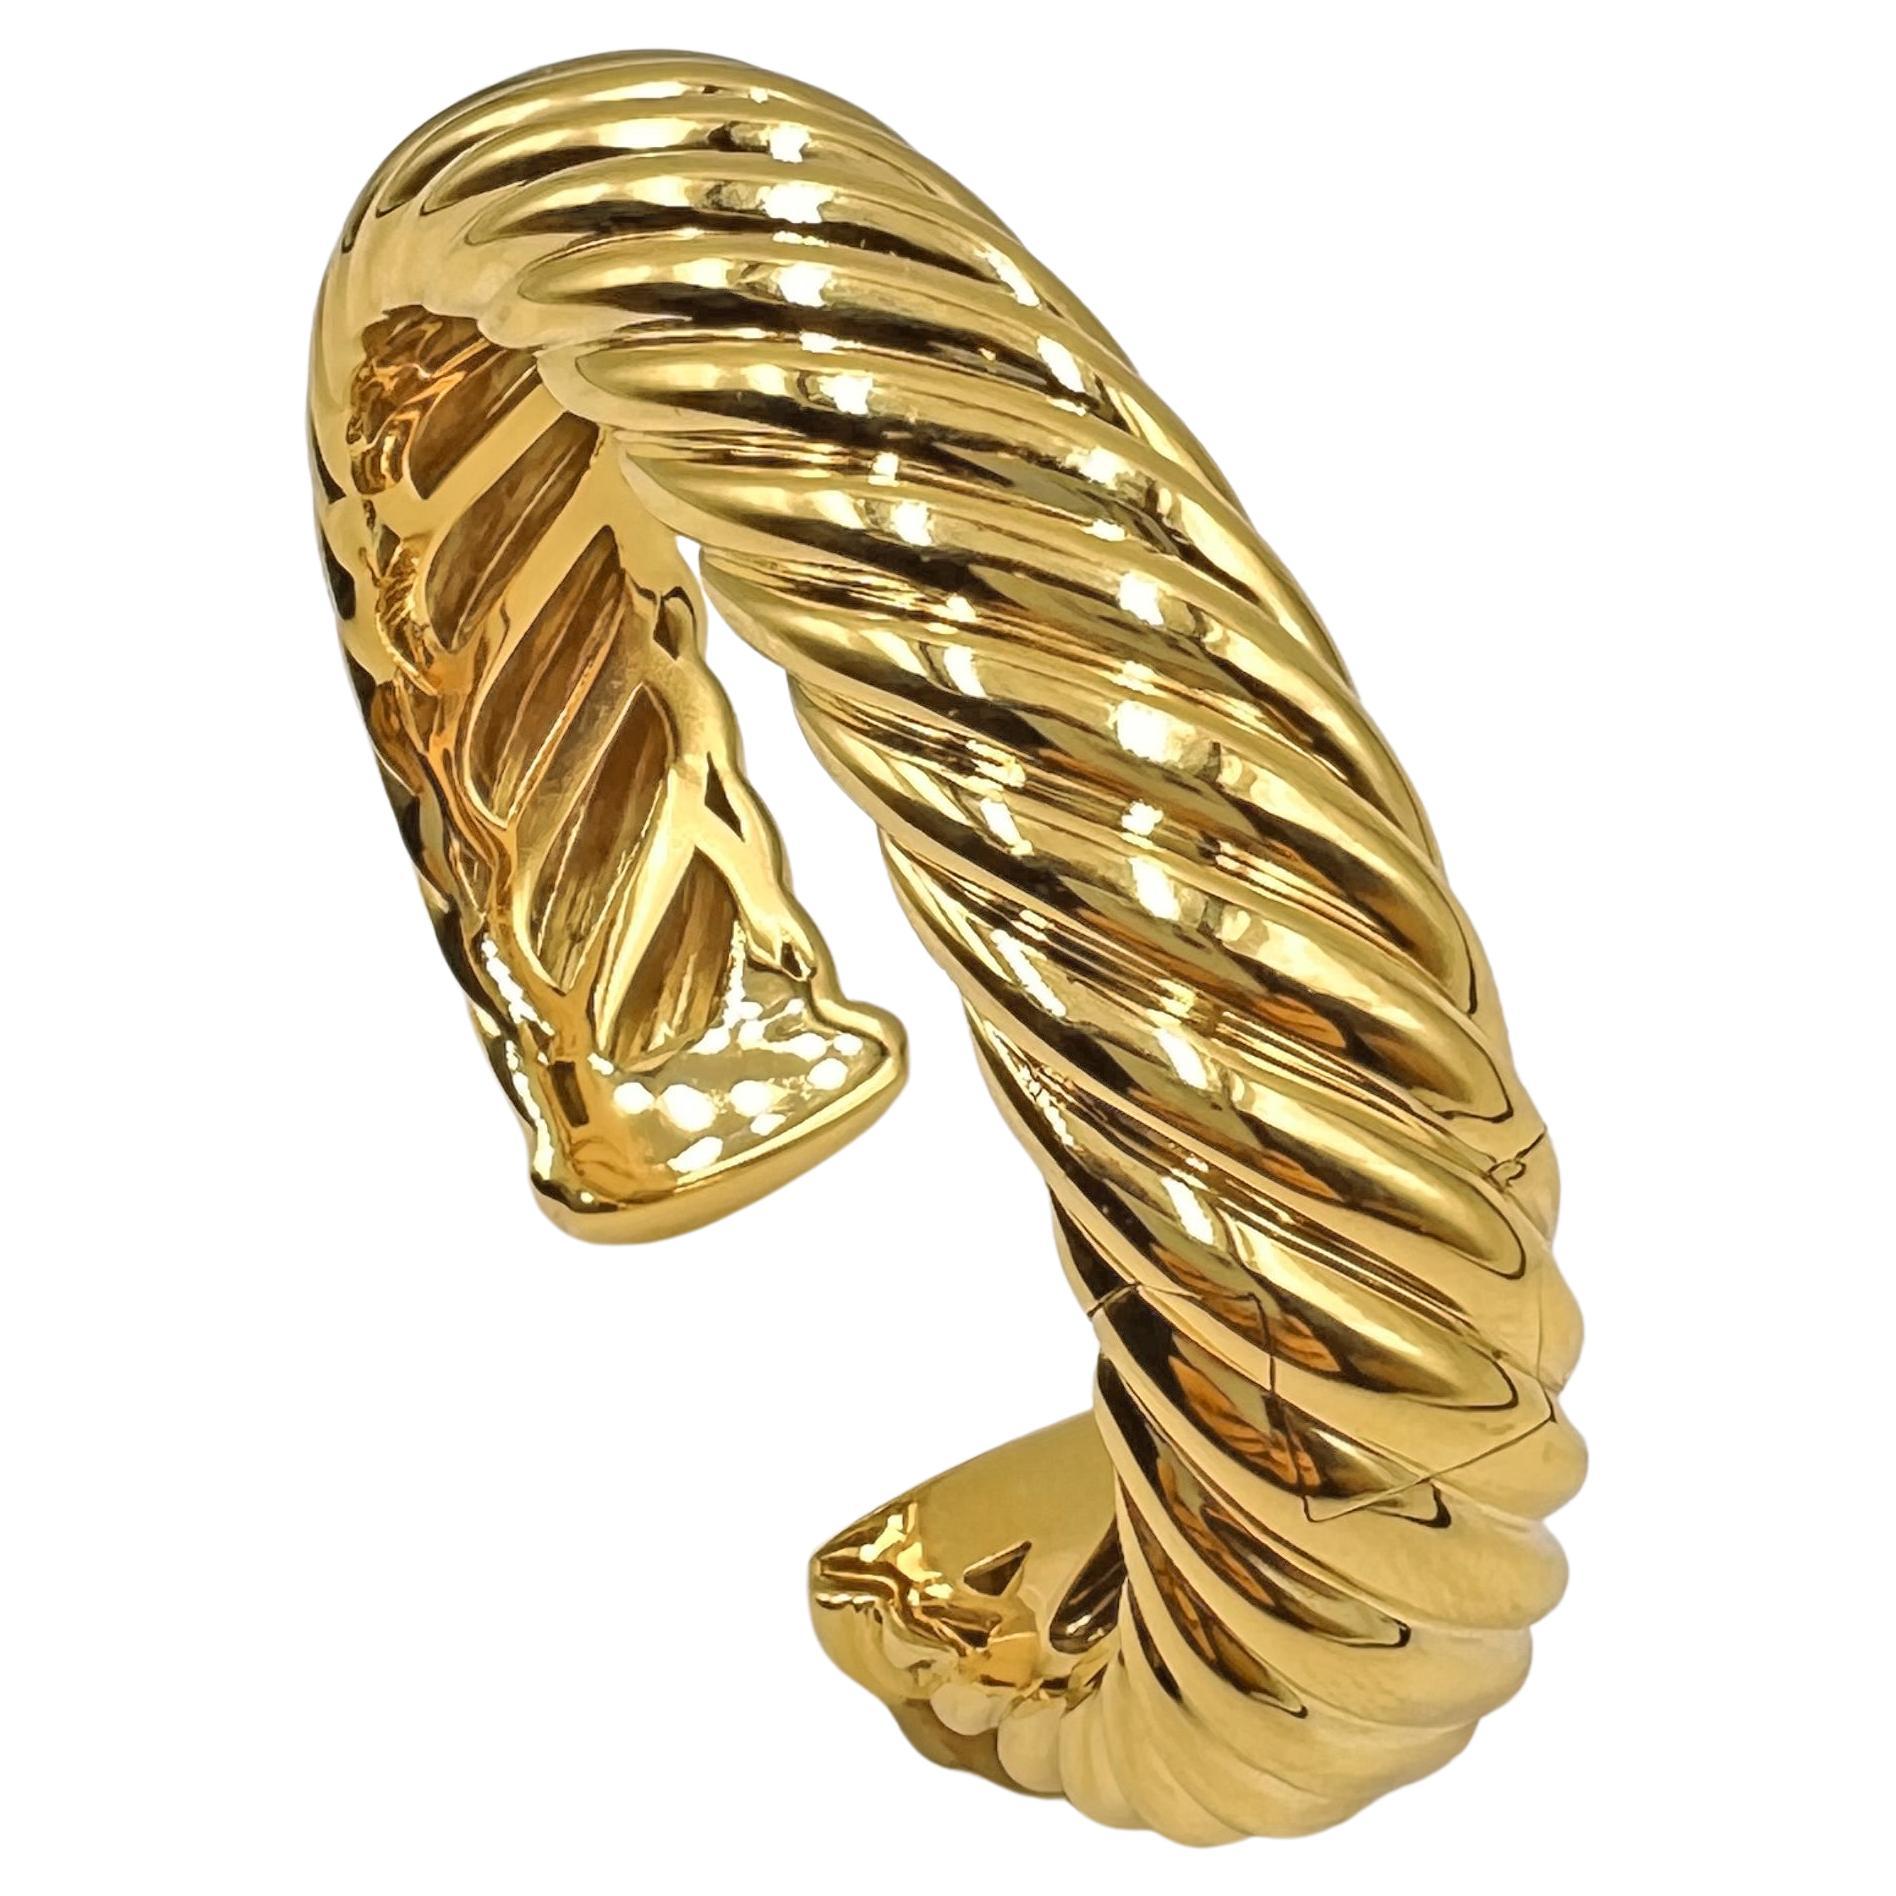 David Yurman oval-shaped cuff bracelet in polished 18k yellow gold.  Diagonal groove design with an open back and hinge on one side to allow for easy fitting on the wearer's wrist.  Measuring 15.5mm in width.  Signed 